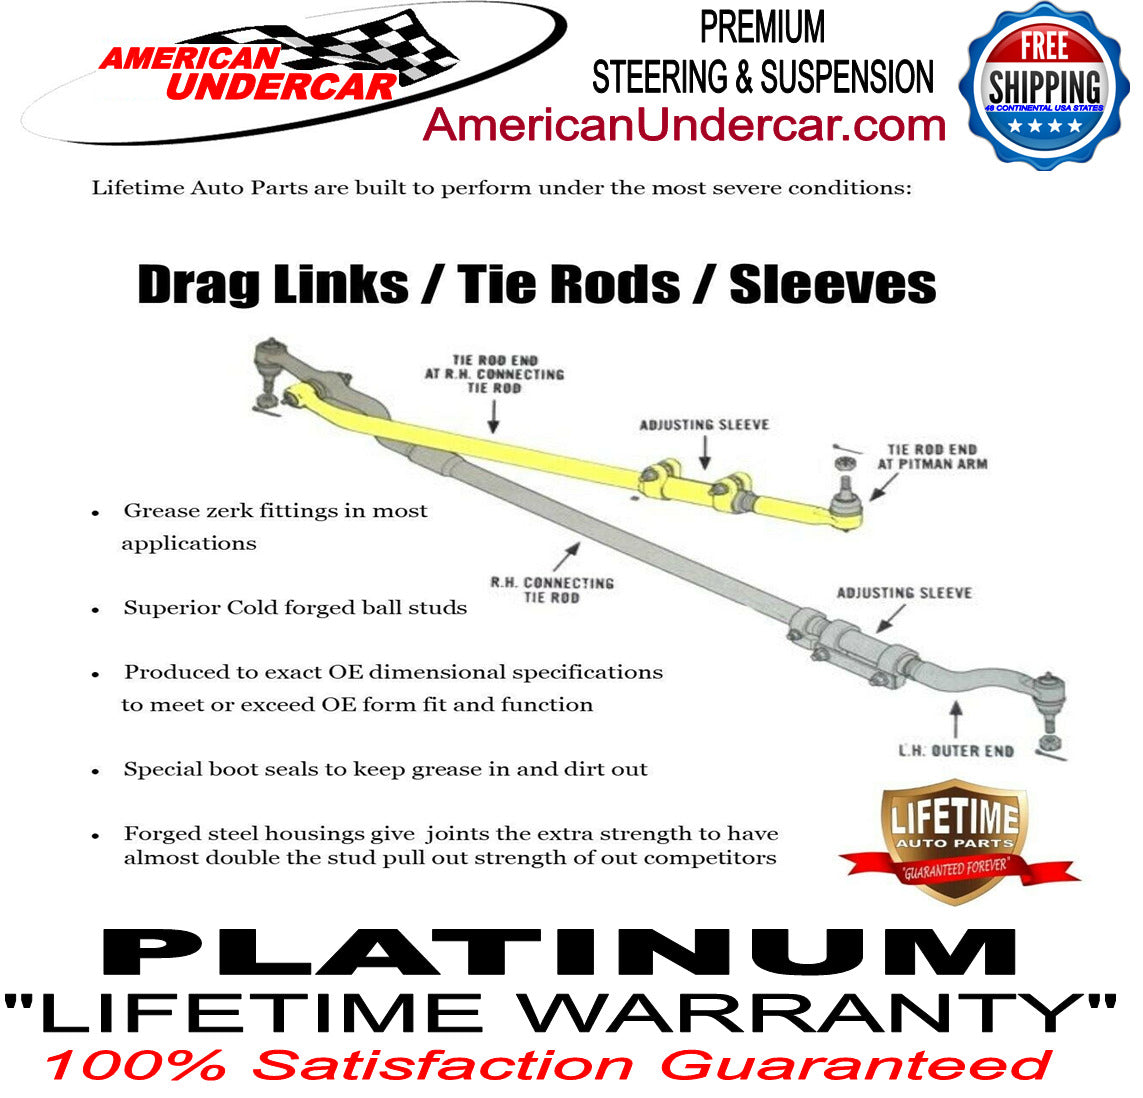 Lifetime Control Arm Link Rear Suspension Kit for 2007-2016 GMC Acadia 2WD, AWD